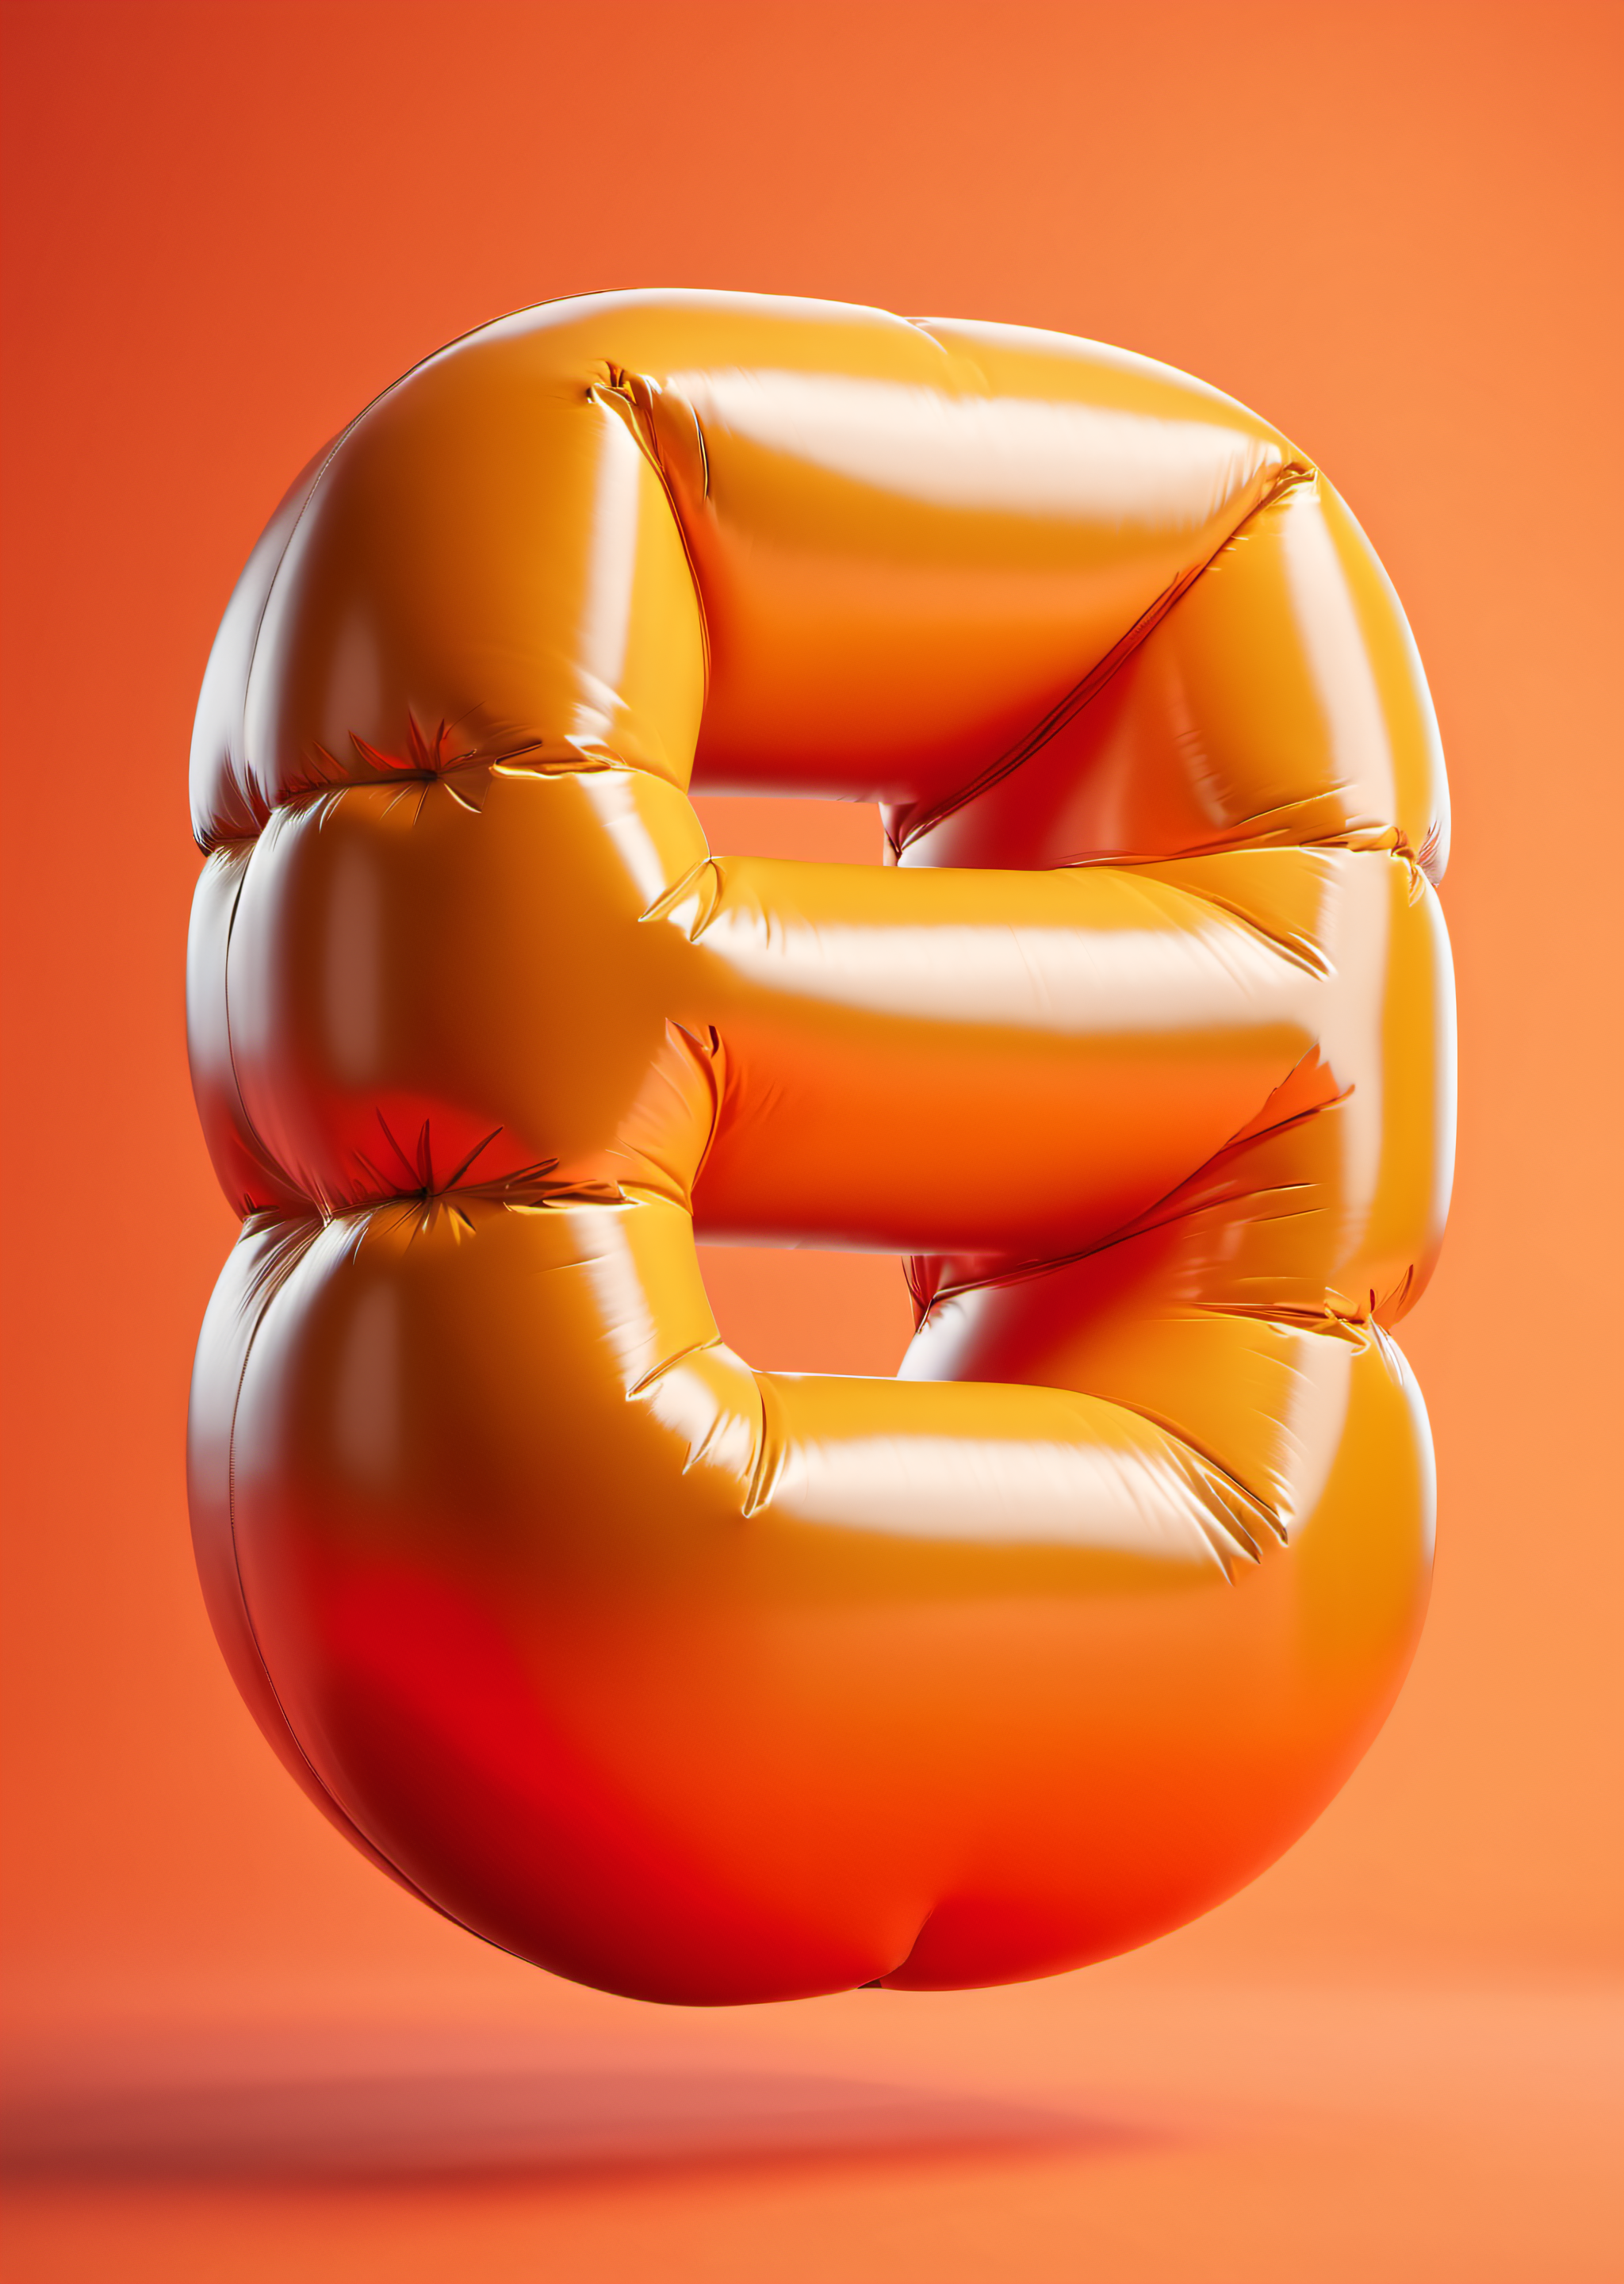 inflatable 3D object